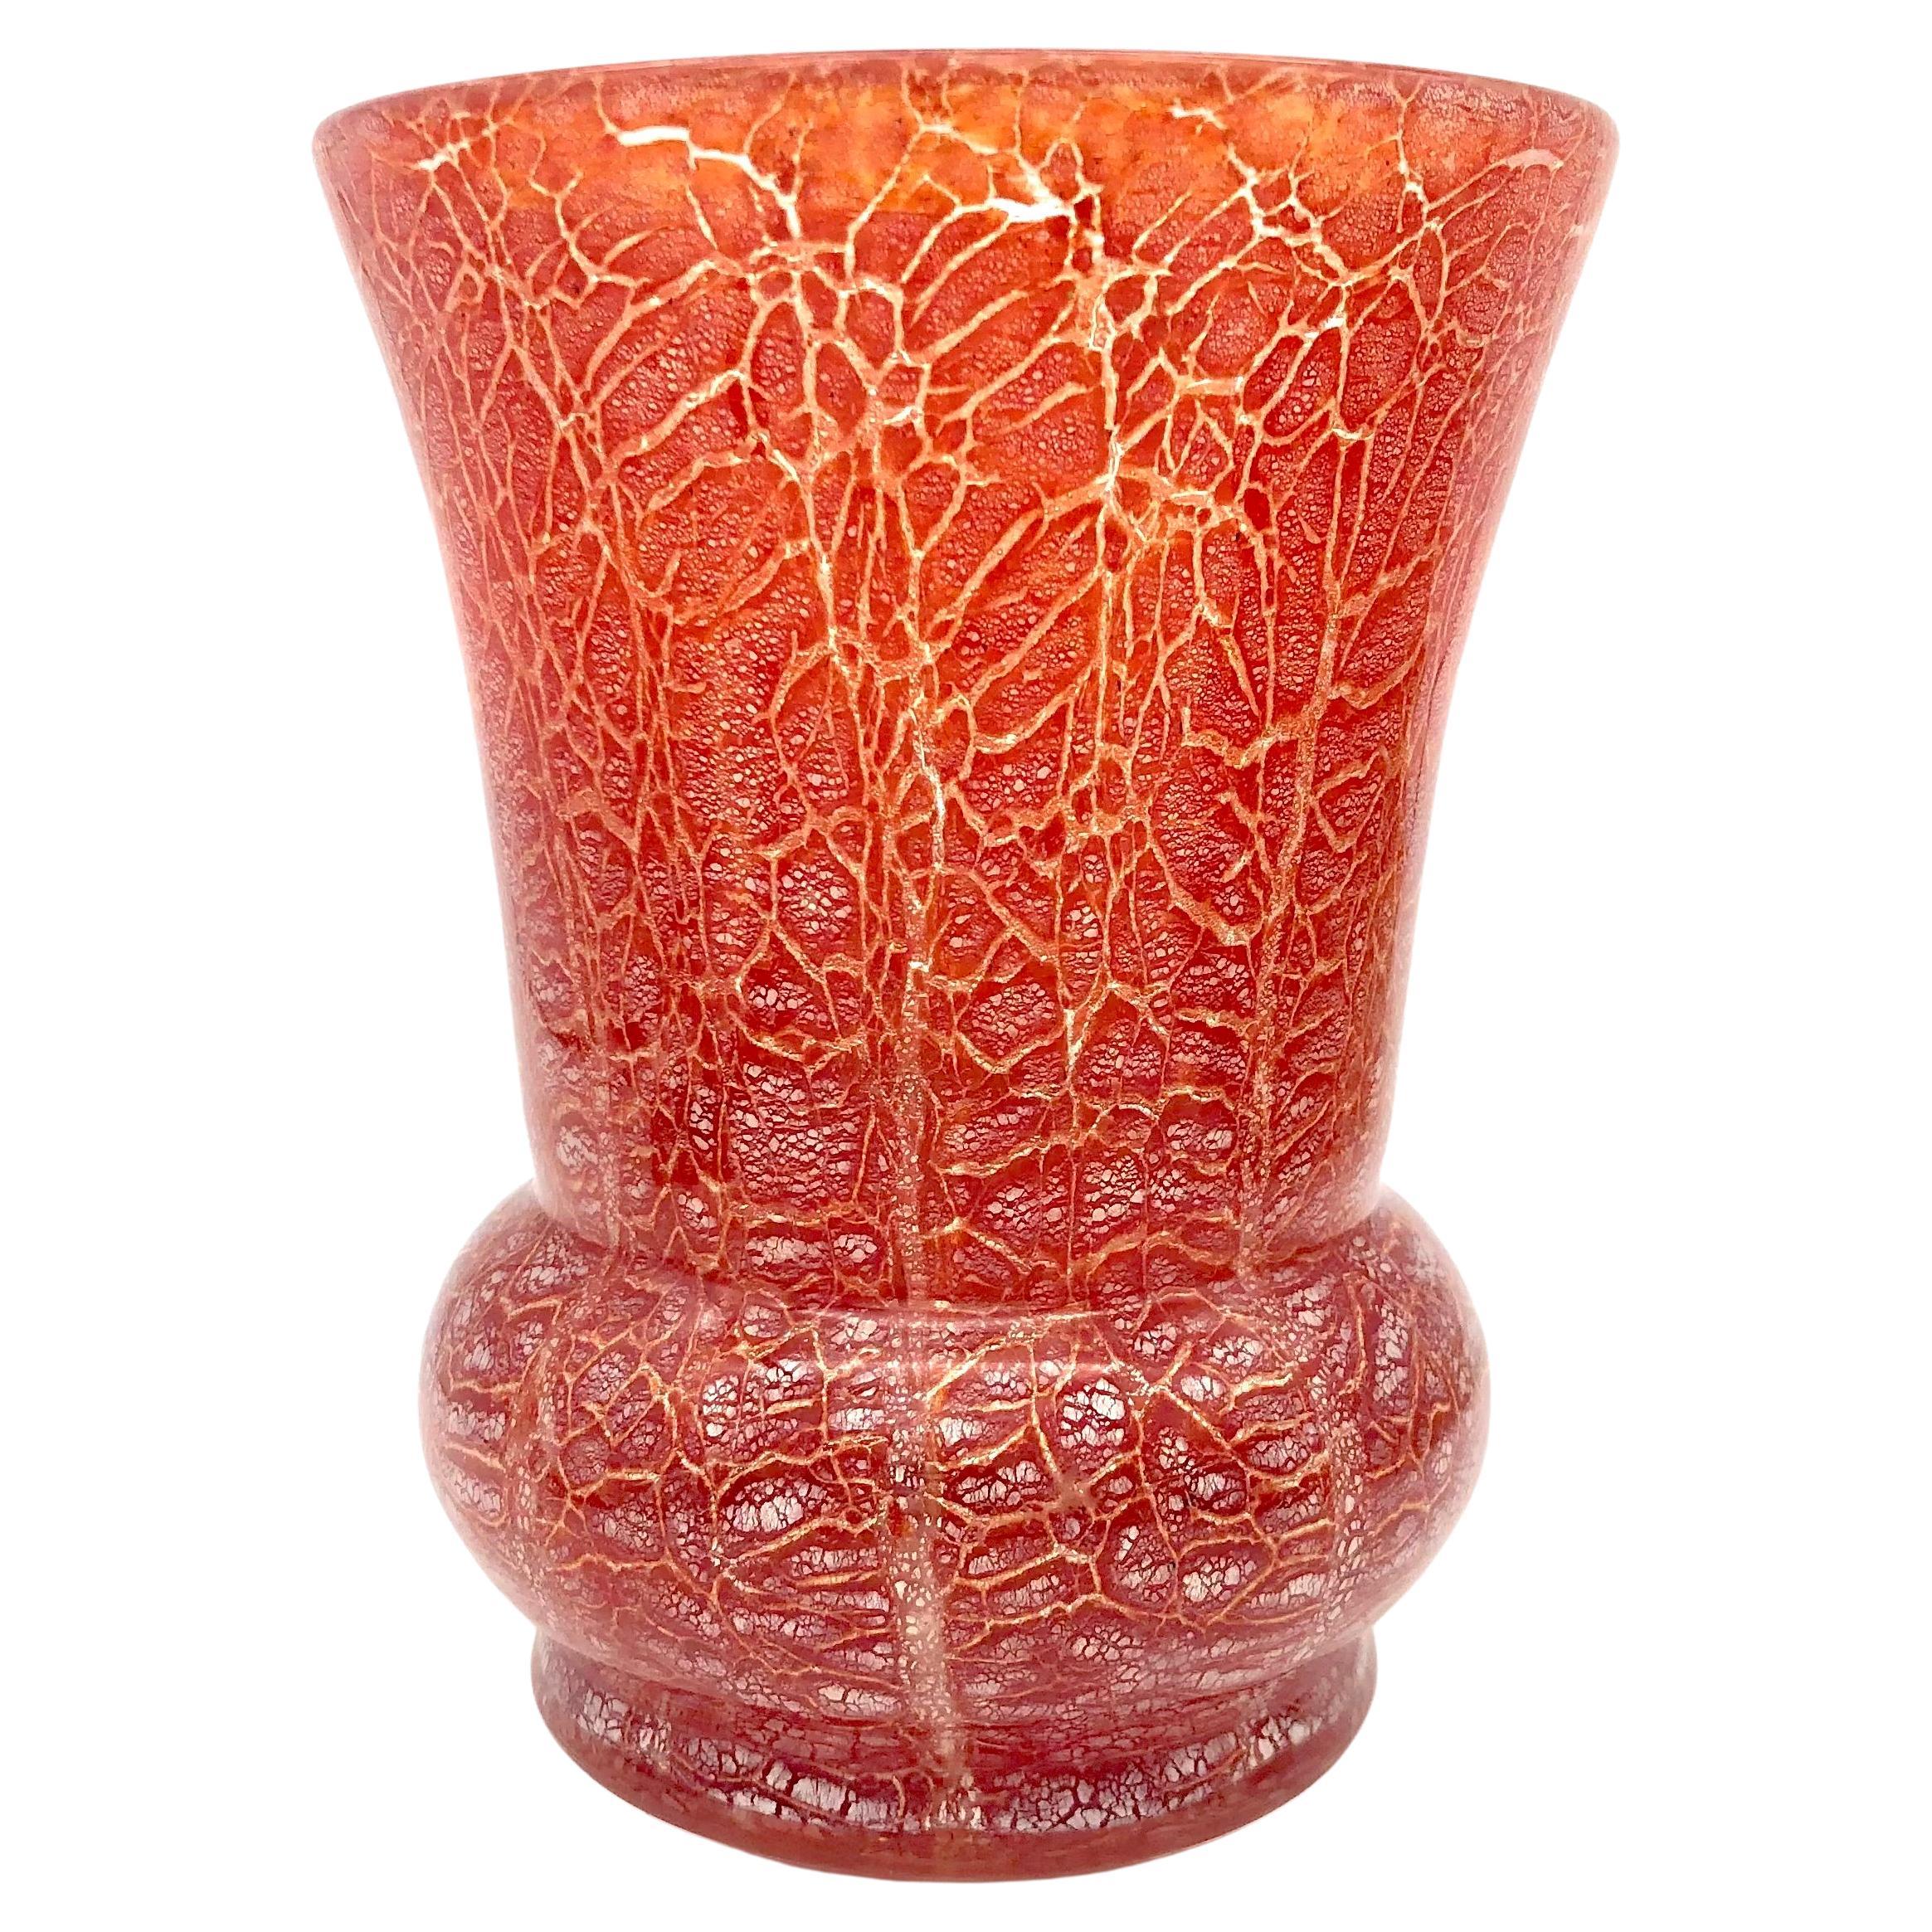 Art Deco Glass Vase Karl Wiedmann For WMF Red Glass With Silver Foil Inclusions